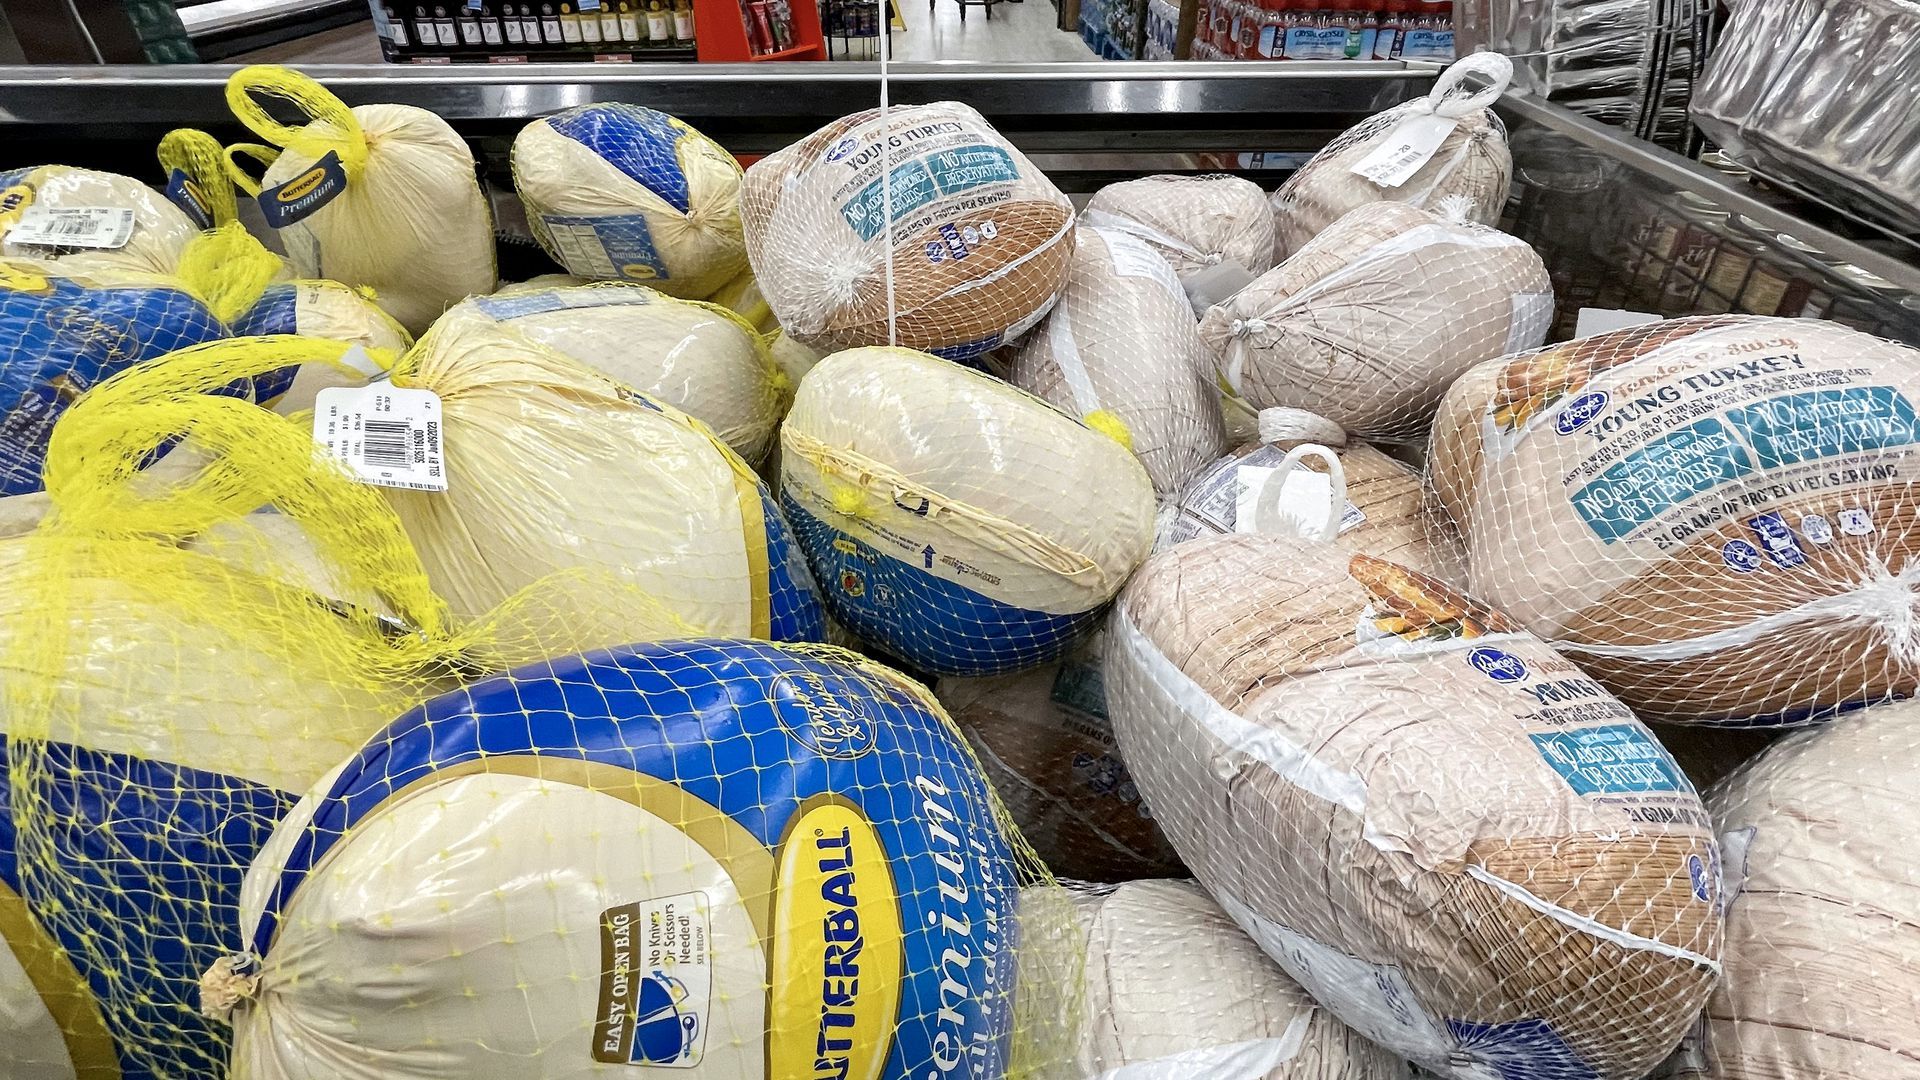 Turkeys for sale at a grocery store.